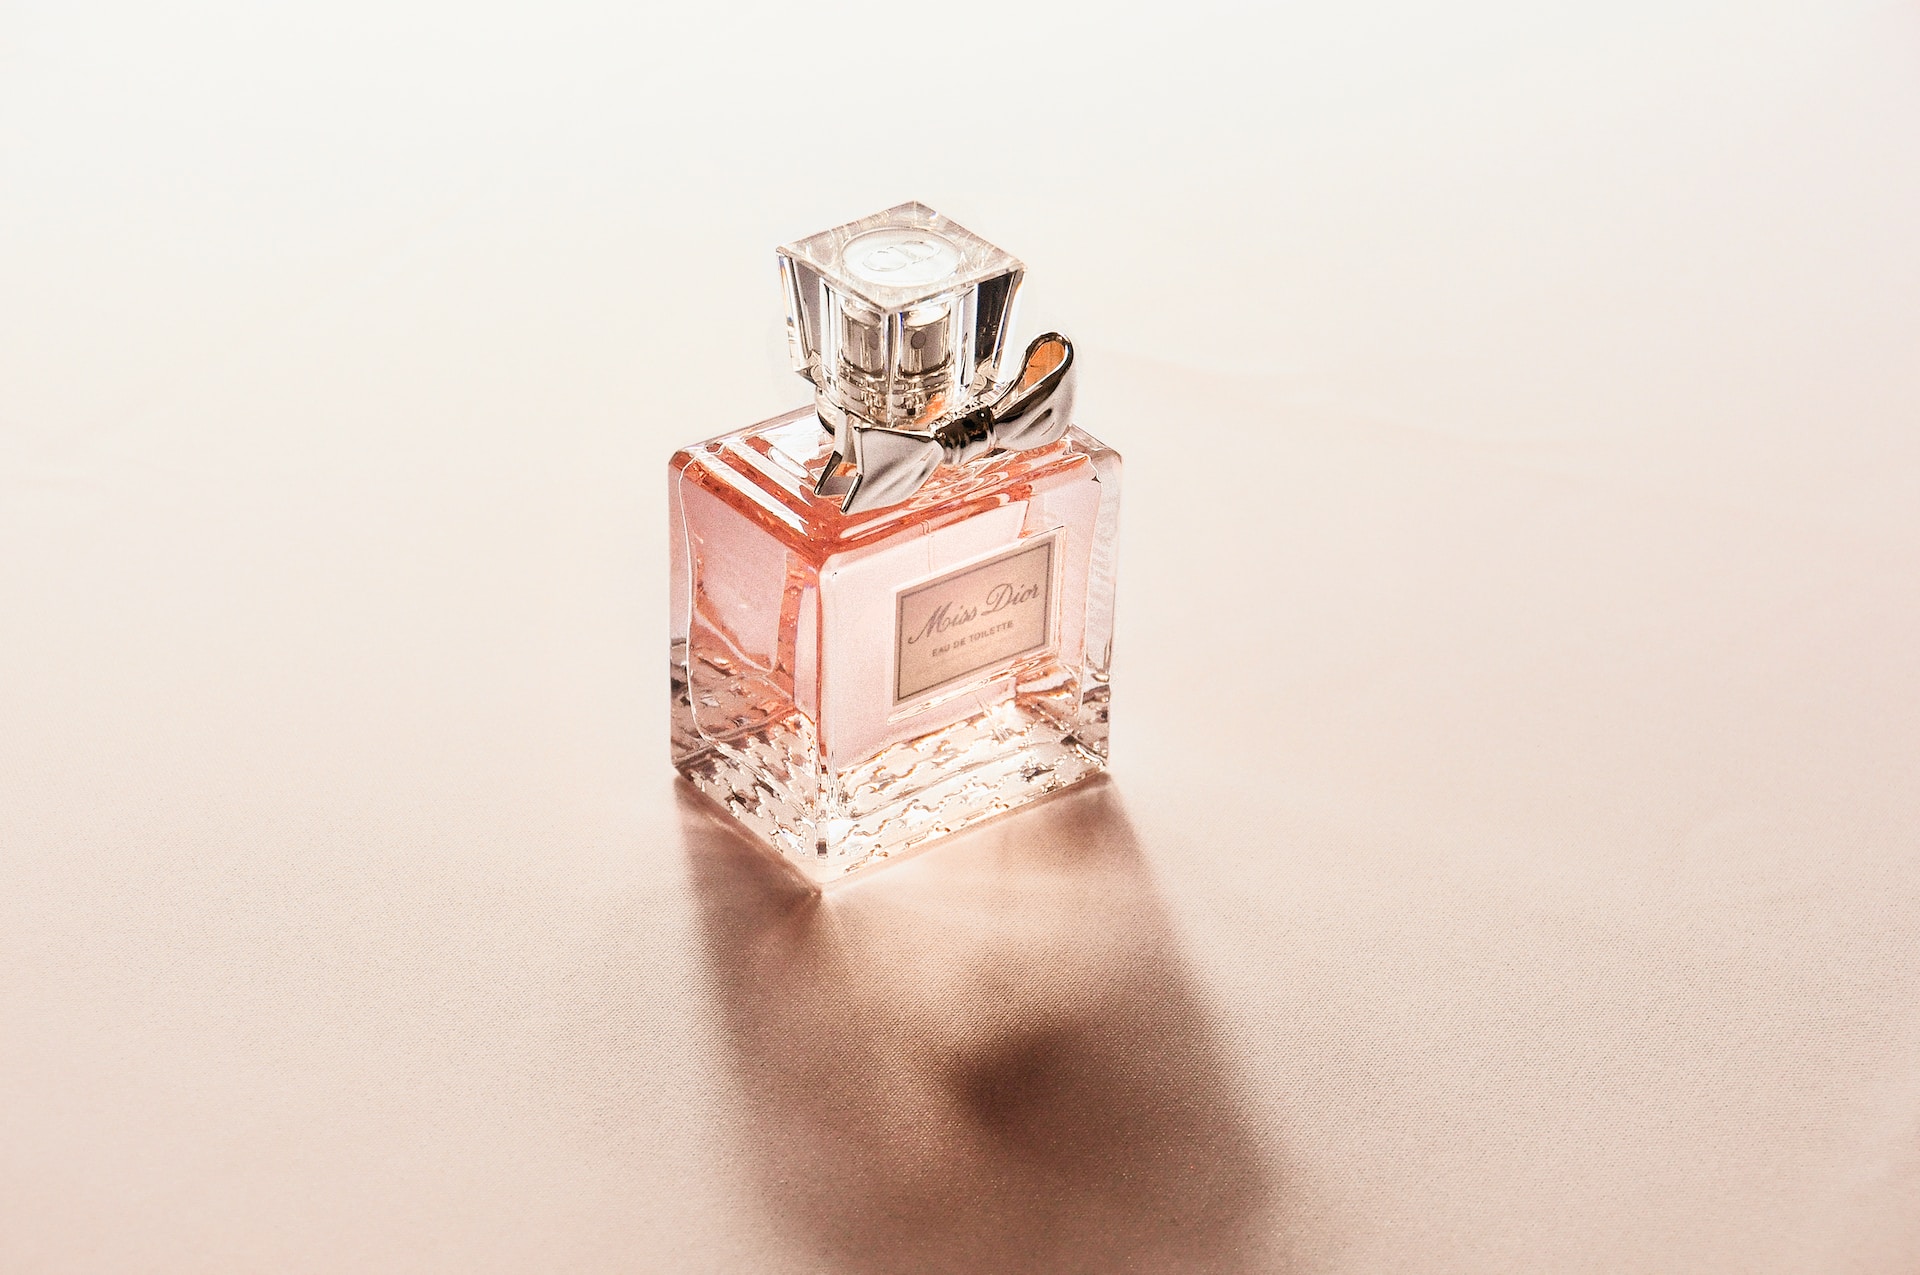 A Journey Through the World of Fragrance